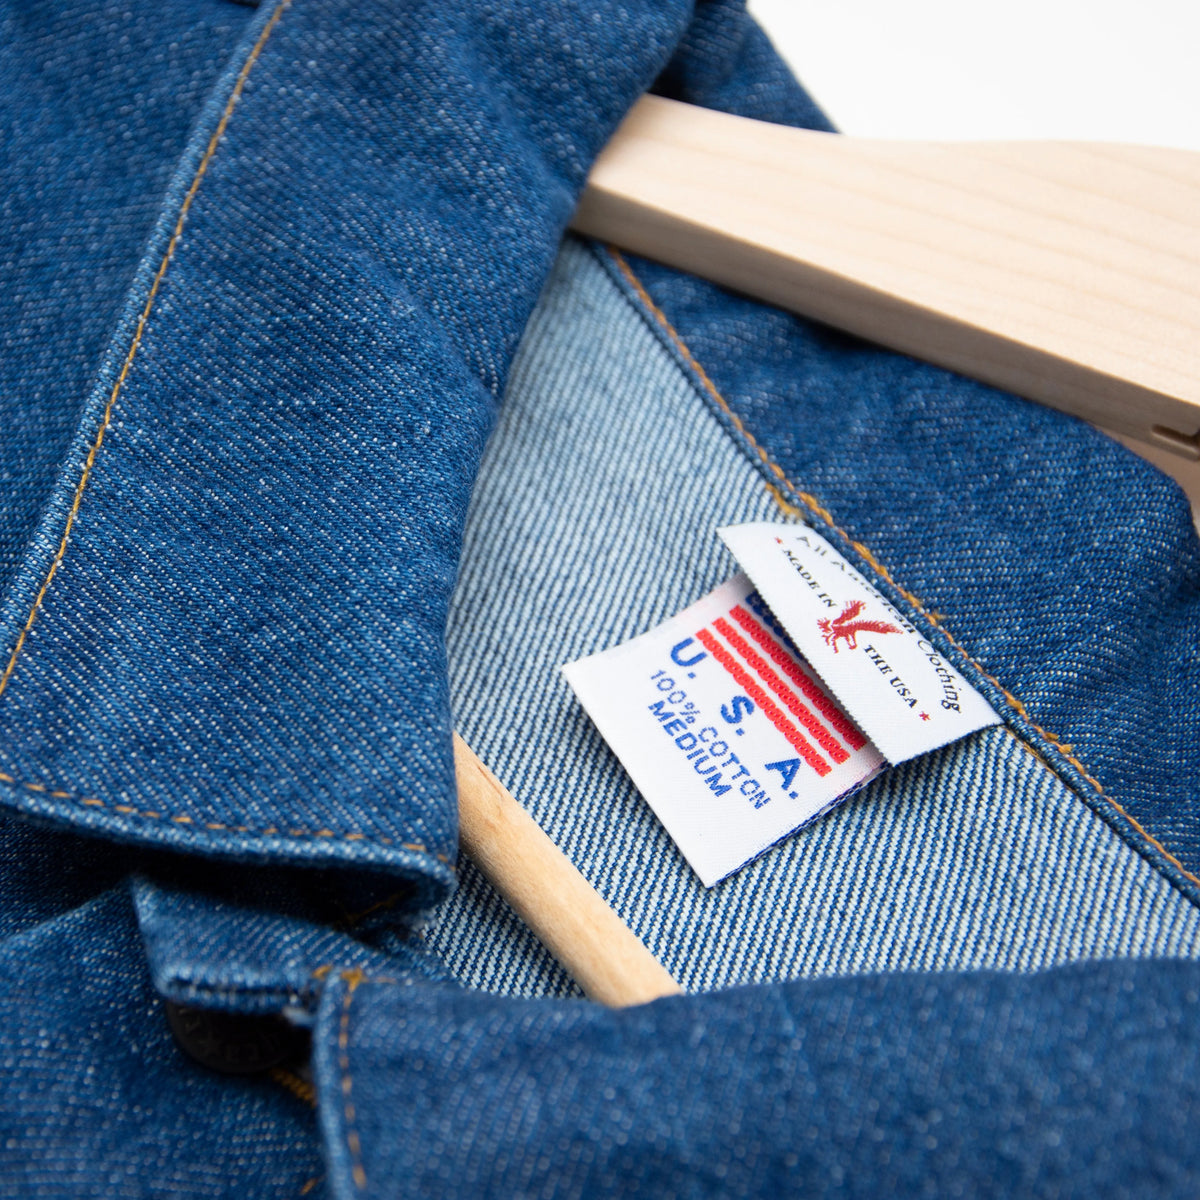 Quality Made in USA Denim Jackets - All American Clothing Co